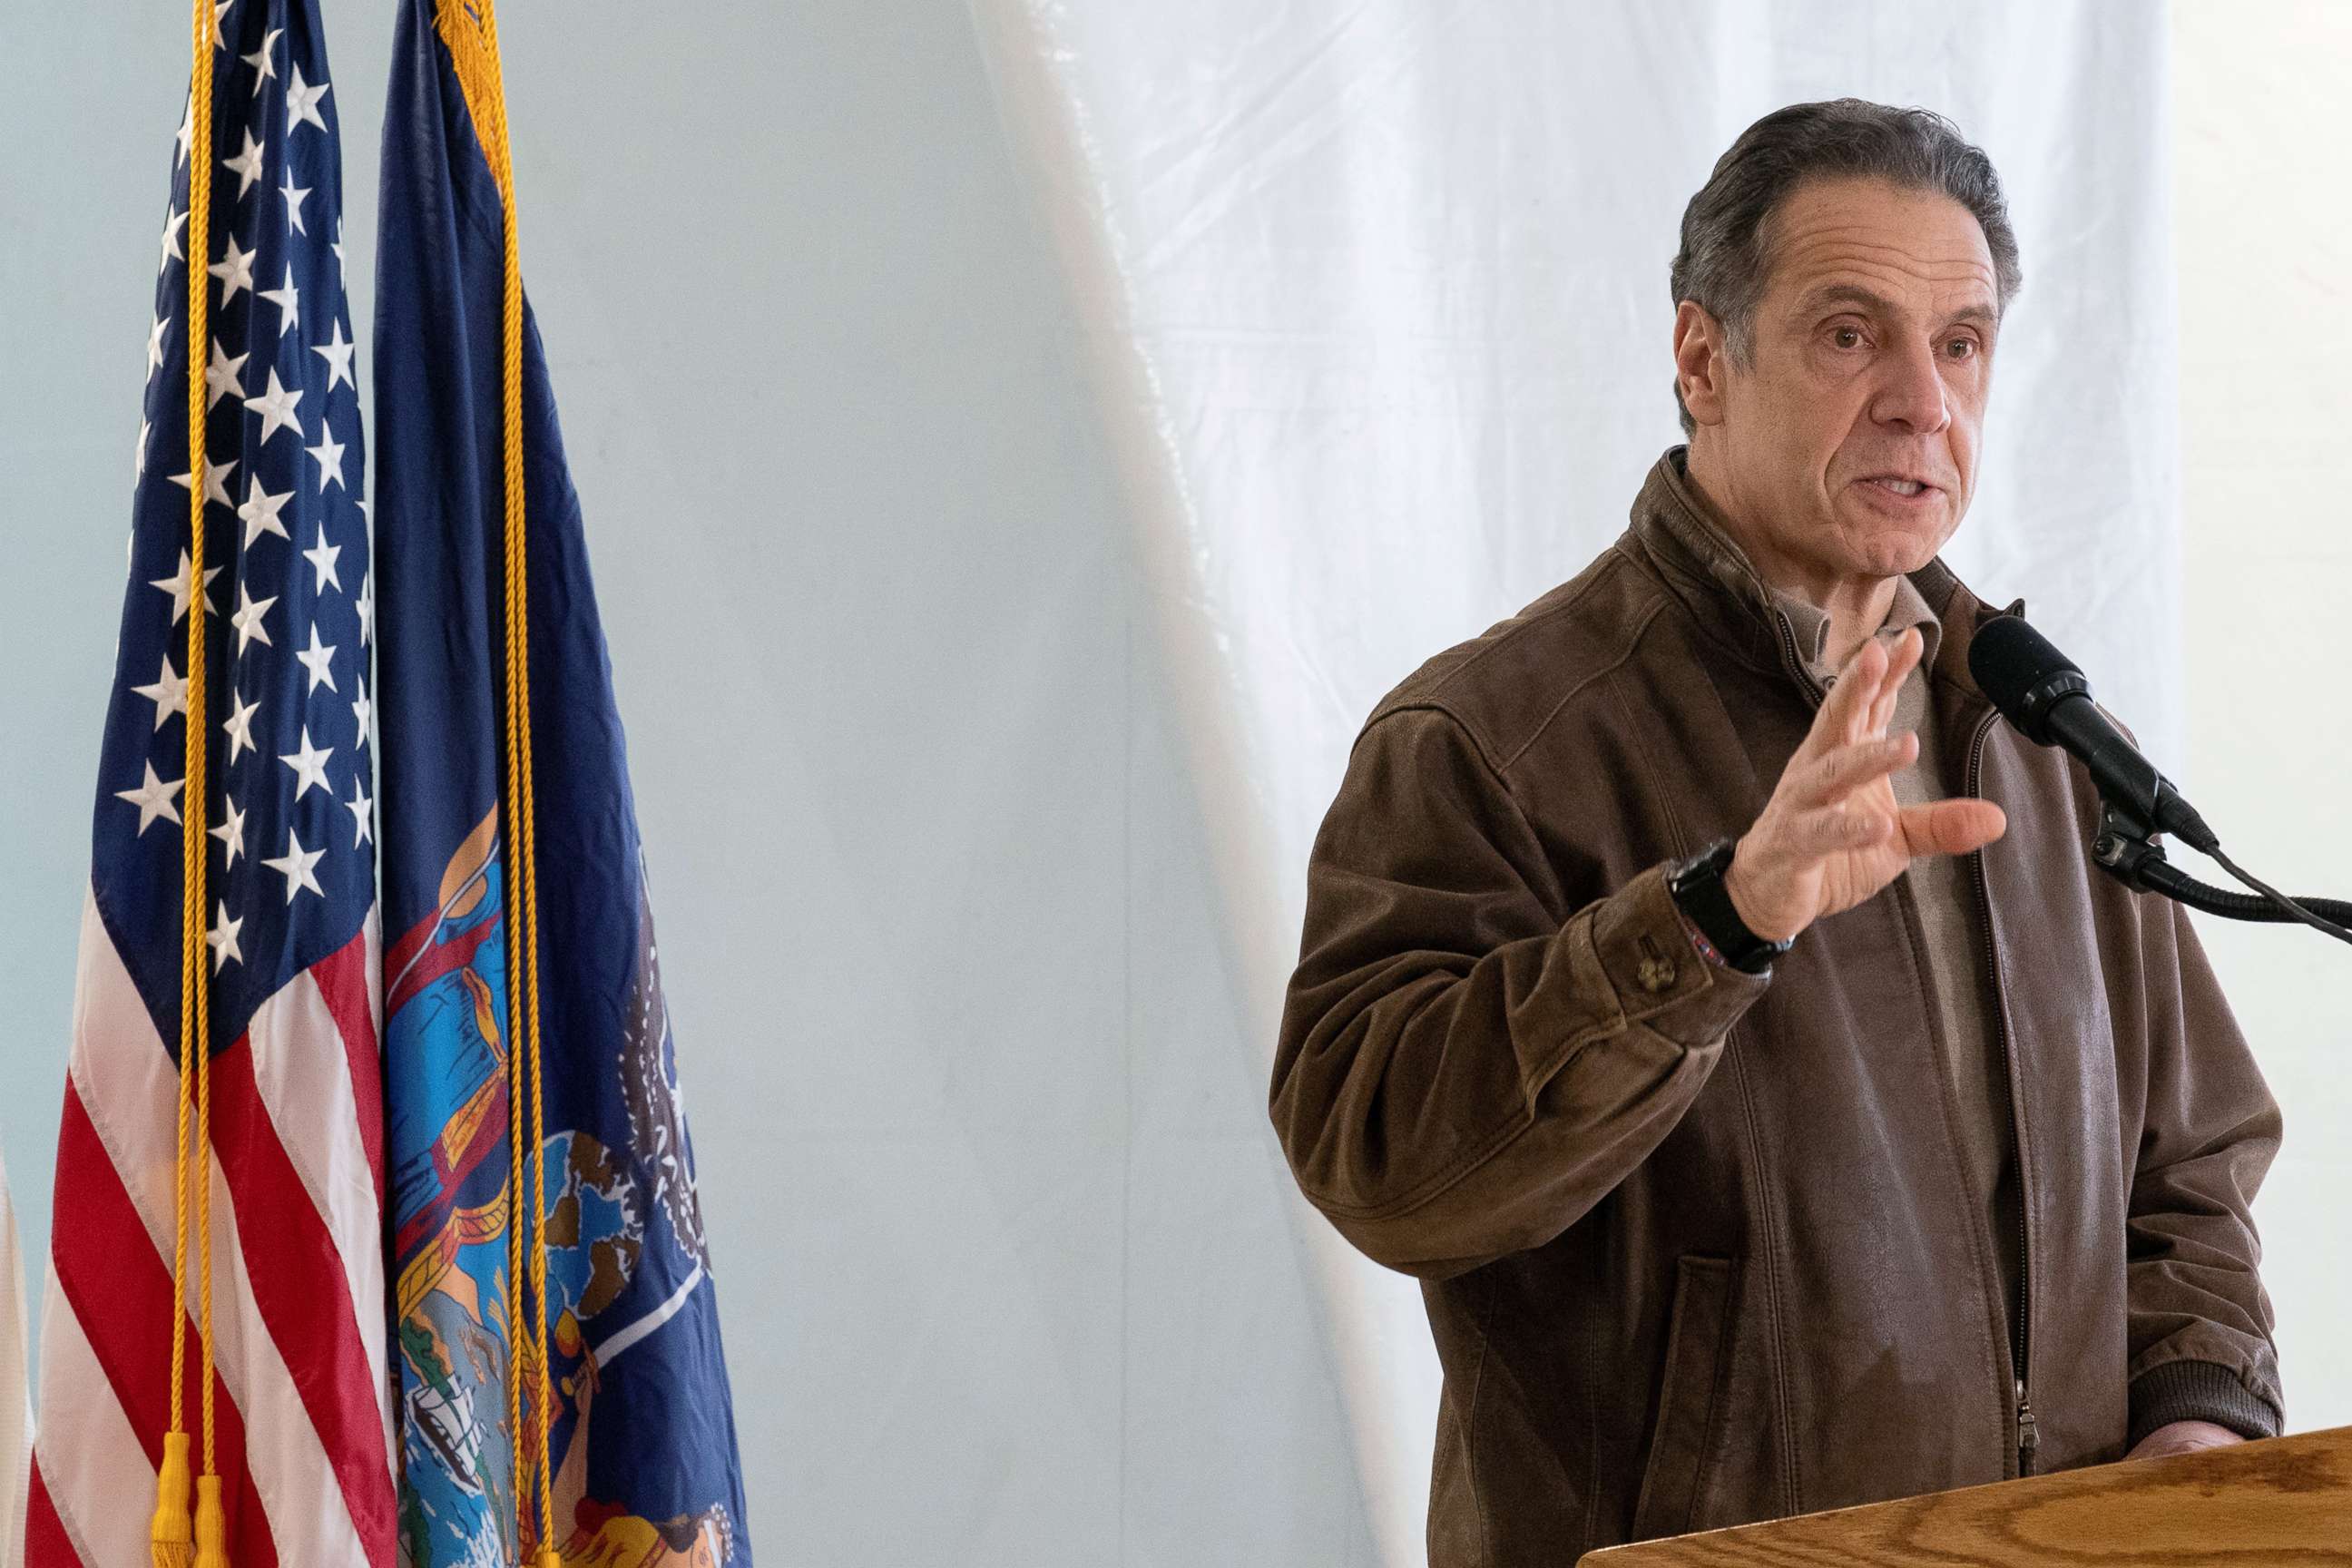 PHOTO: New York Gov. Andrew Cuomo speaks to reporters during a news conference in Brooklyn, N.Y., Jan. 23, 2021.